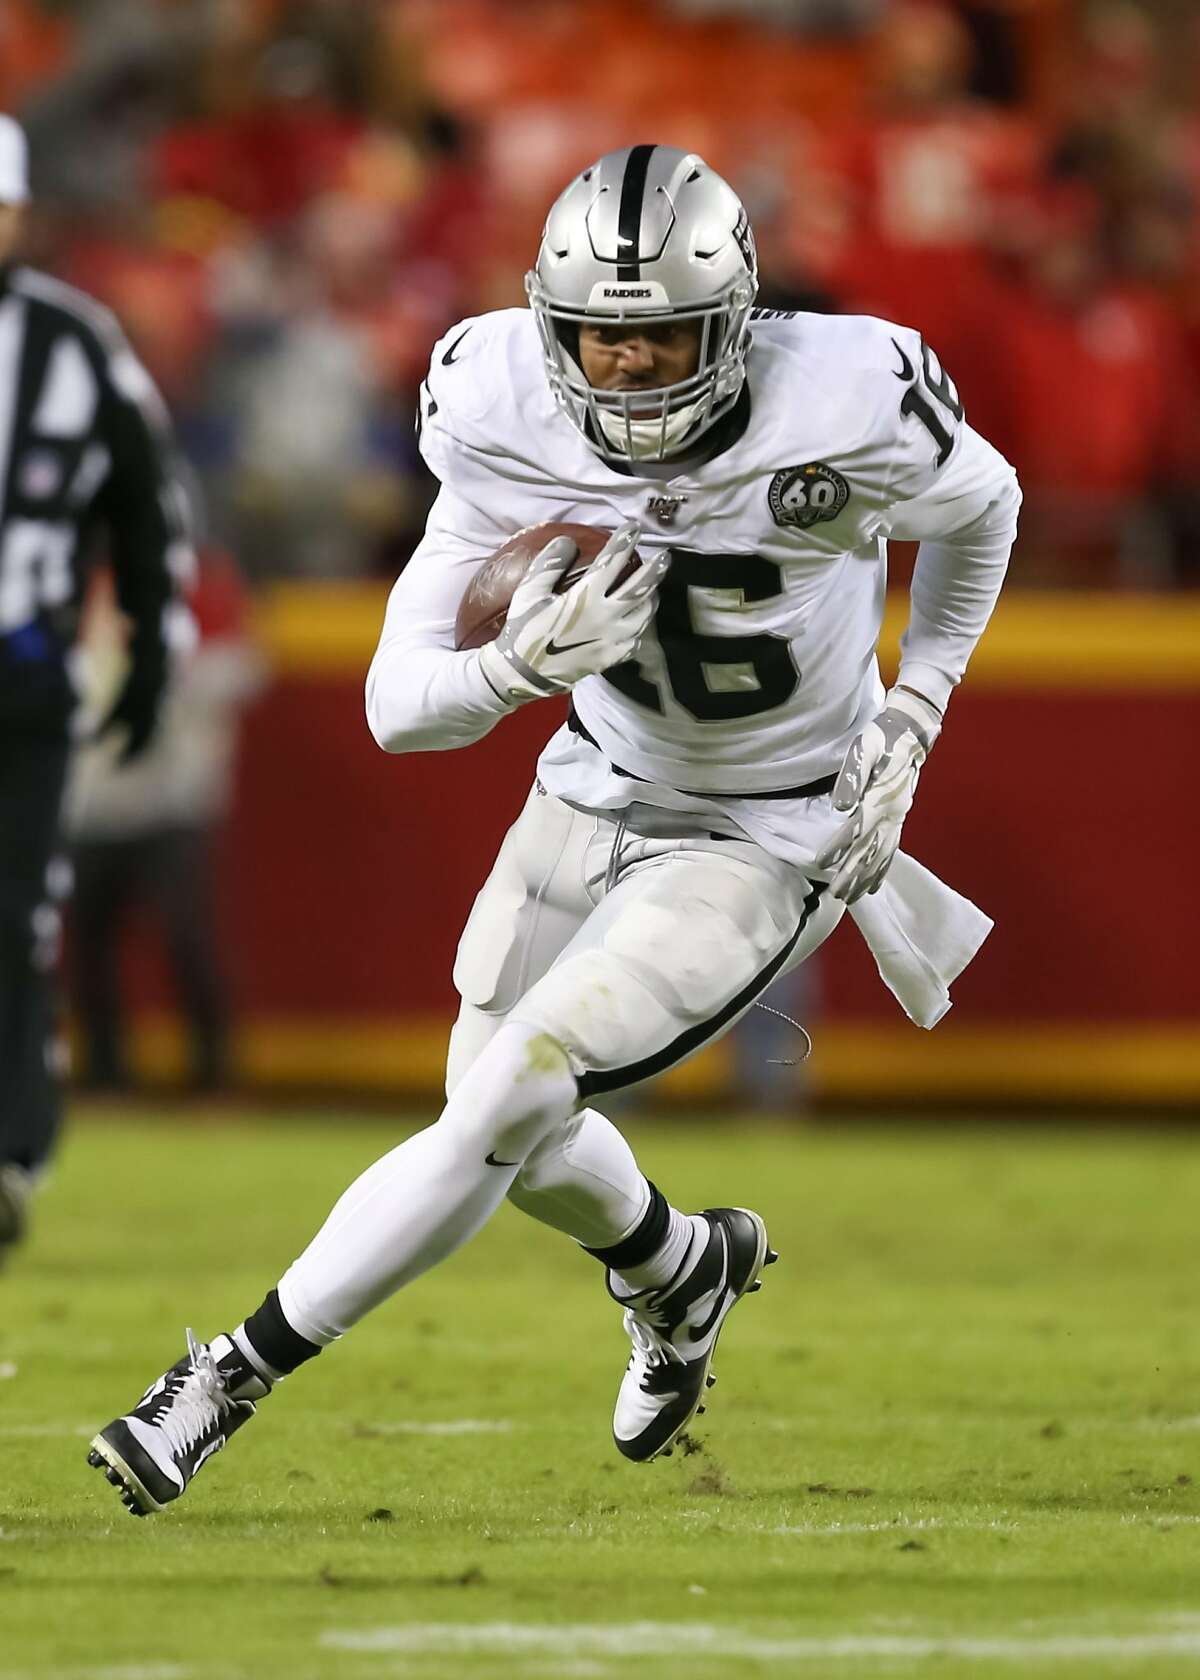 KANSAS CITY, MO - DECEMBER 01: Oakland Raiders wide receiver Tyrell Williams (16) runs after the catch in the fourth quarter of an AFC West game between the Oakland Raiders and Kansas City Chiefs on December 1, 2019 at Arrowhead Stadium in Kansas City, MO. (Photo by Scott Winters/Icon Sportswire via Getty Images)